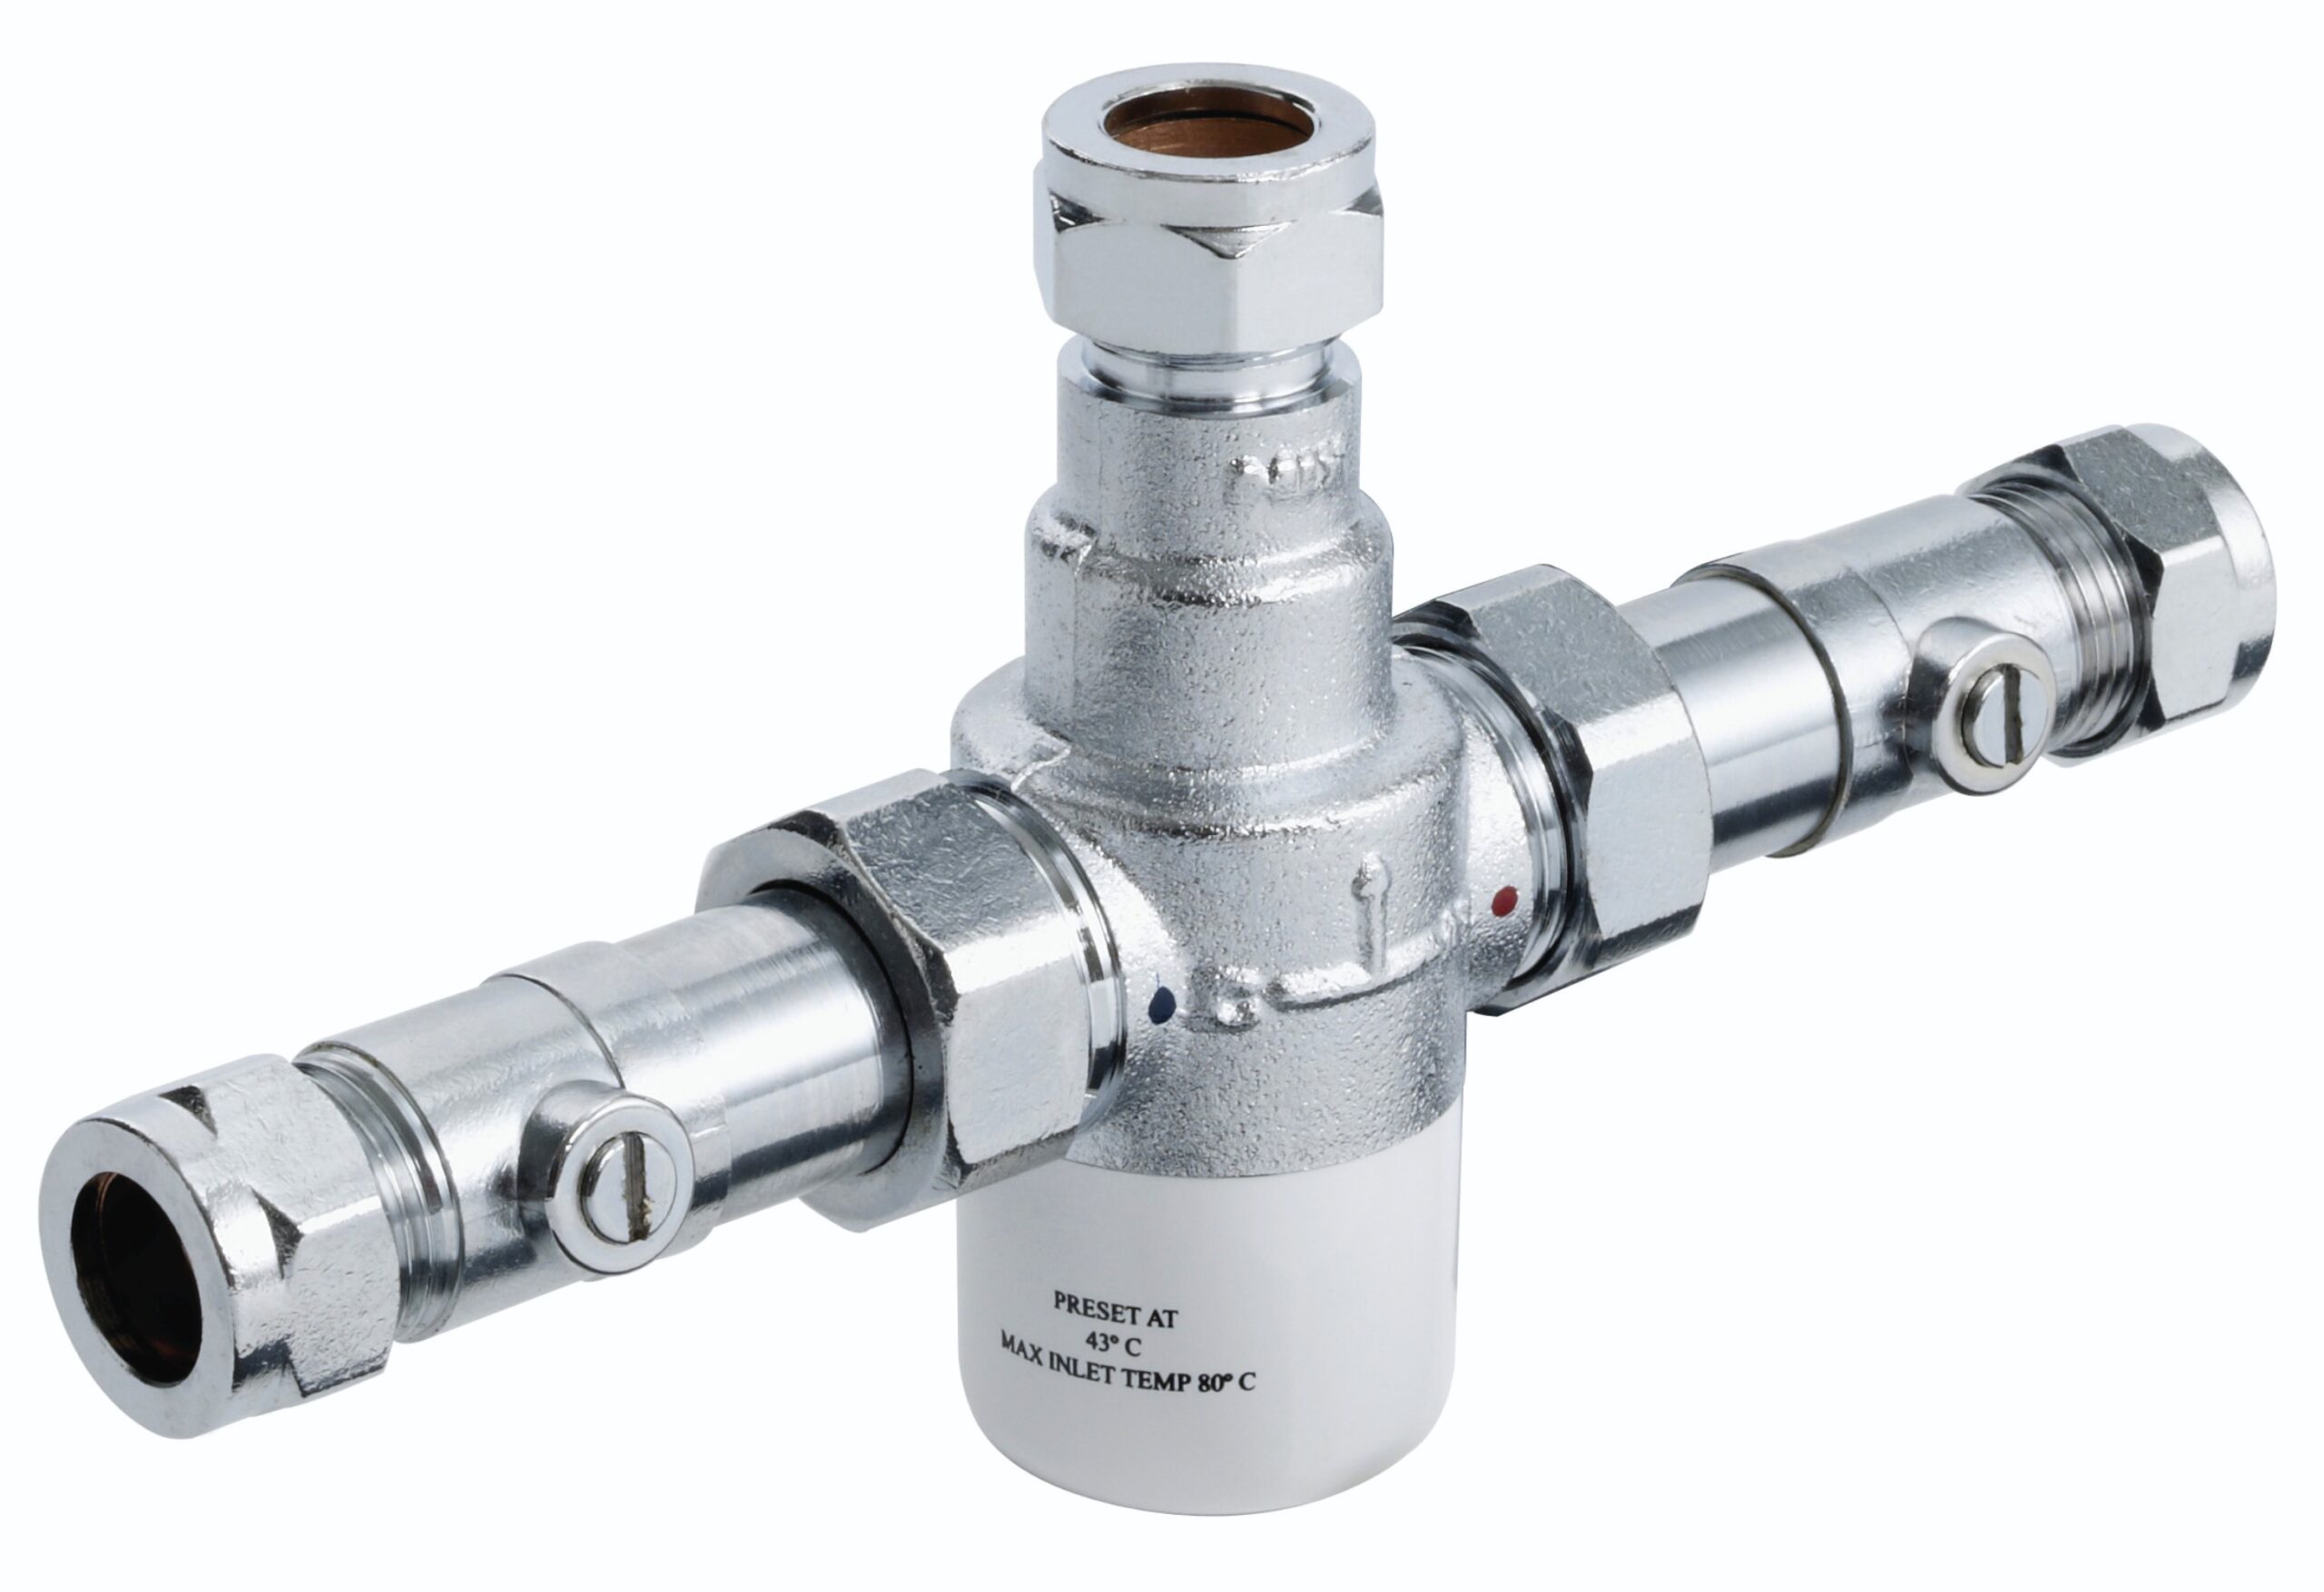 Bristan 15mm TMV3 Thermostatic Mixing Valve with Isolation (MT503CP-ISO)